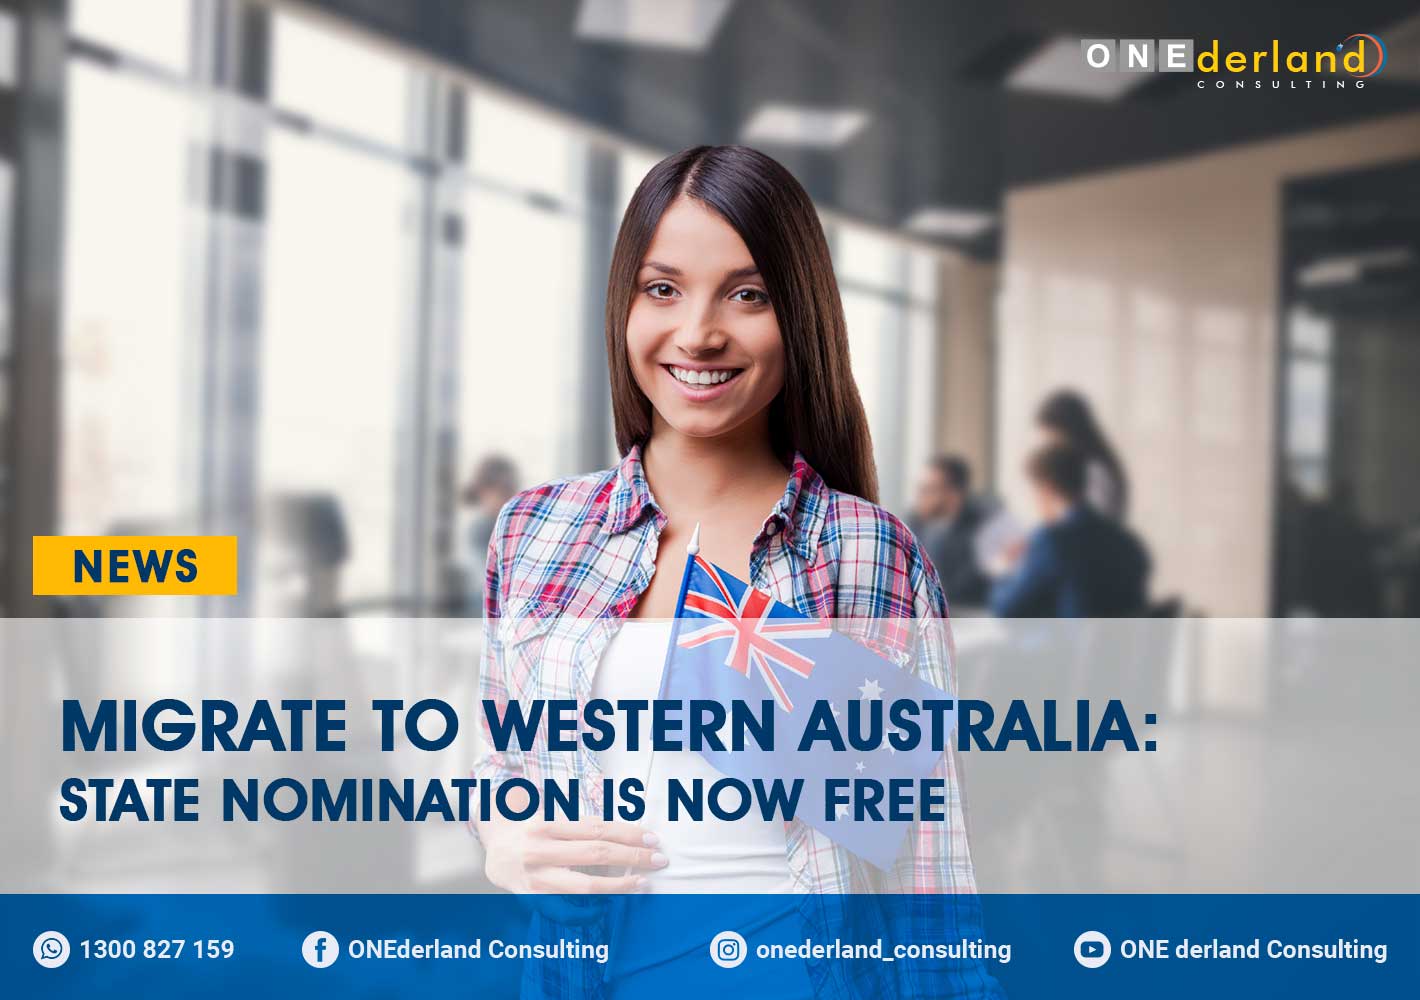 Migrate to Western Australia State Nomination is now FREE